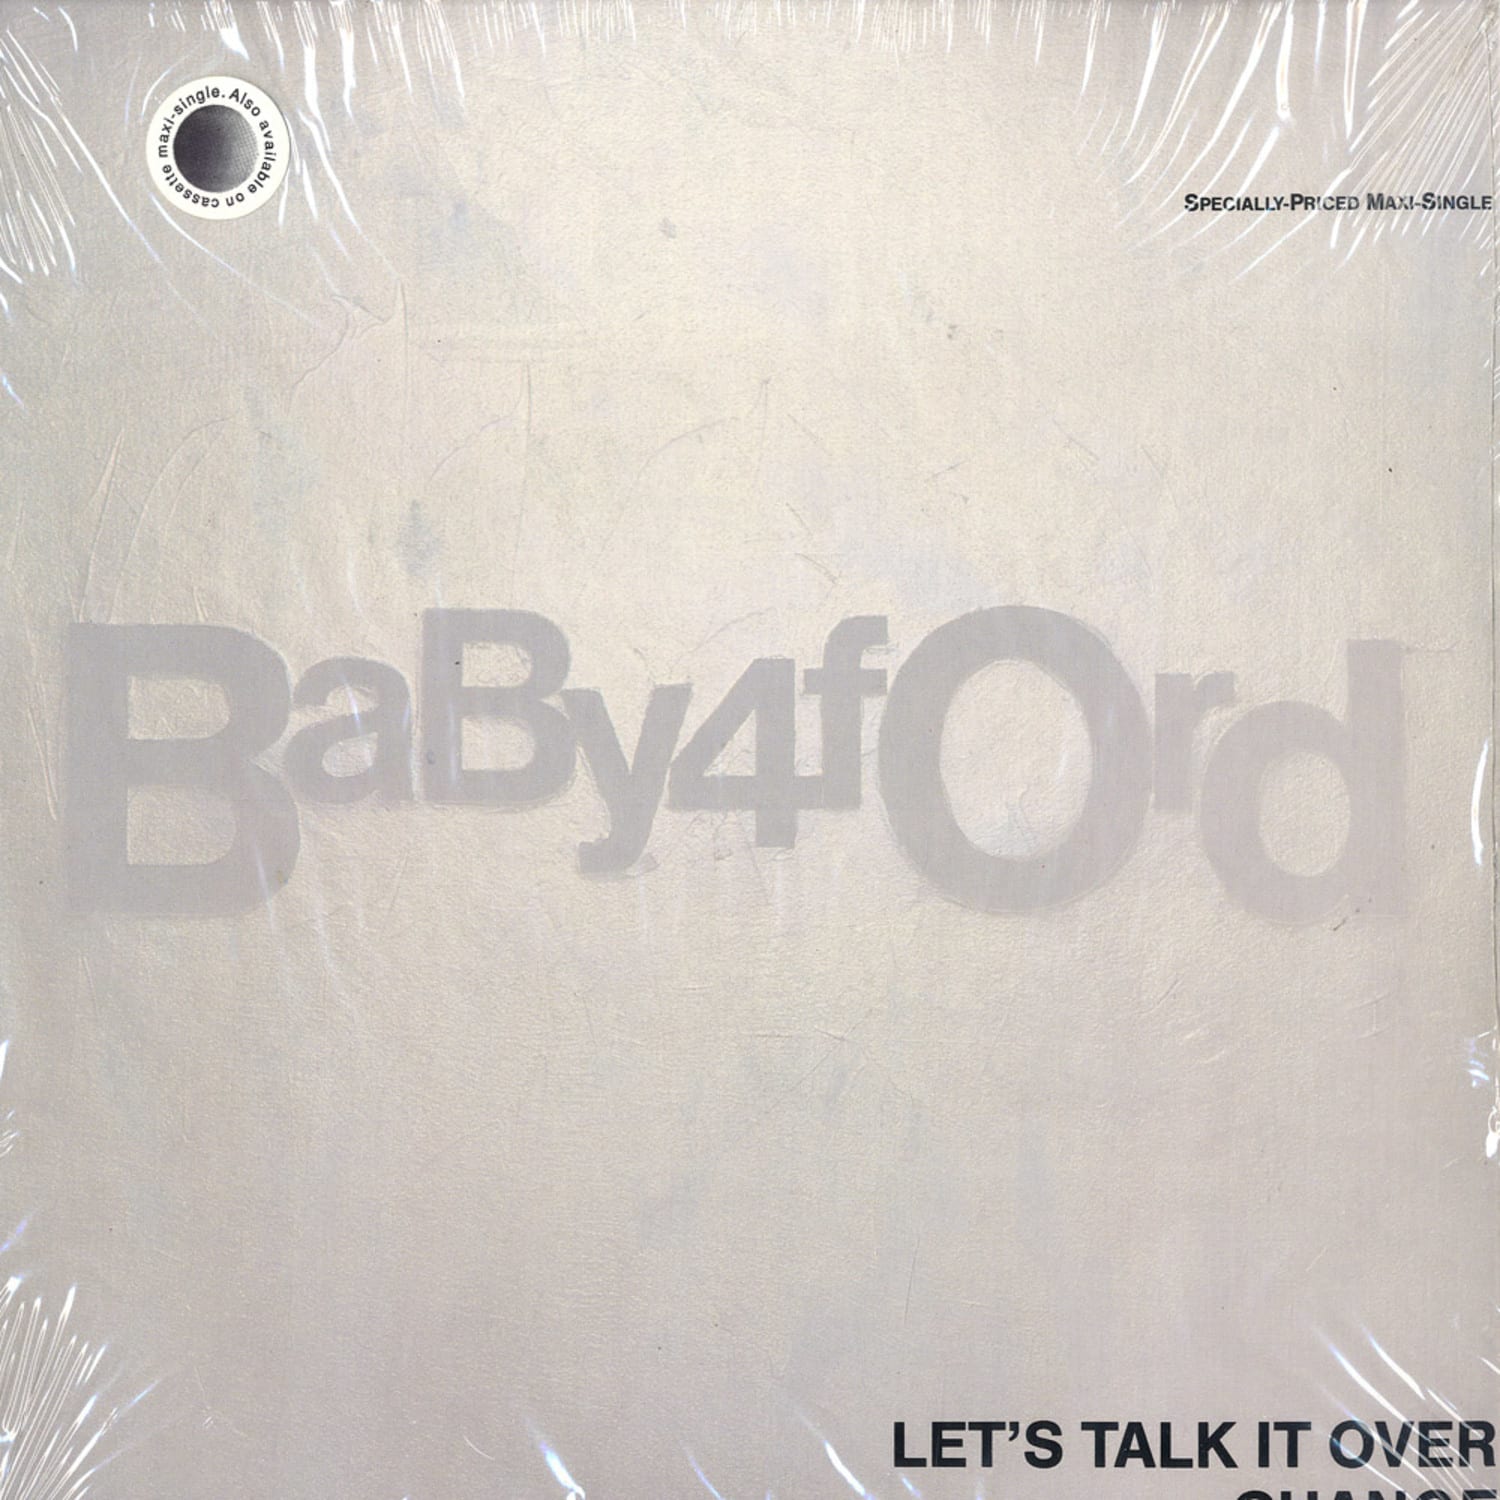 Baby Ford - LETS TALK